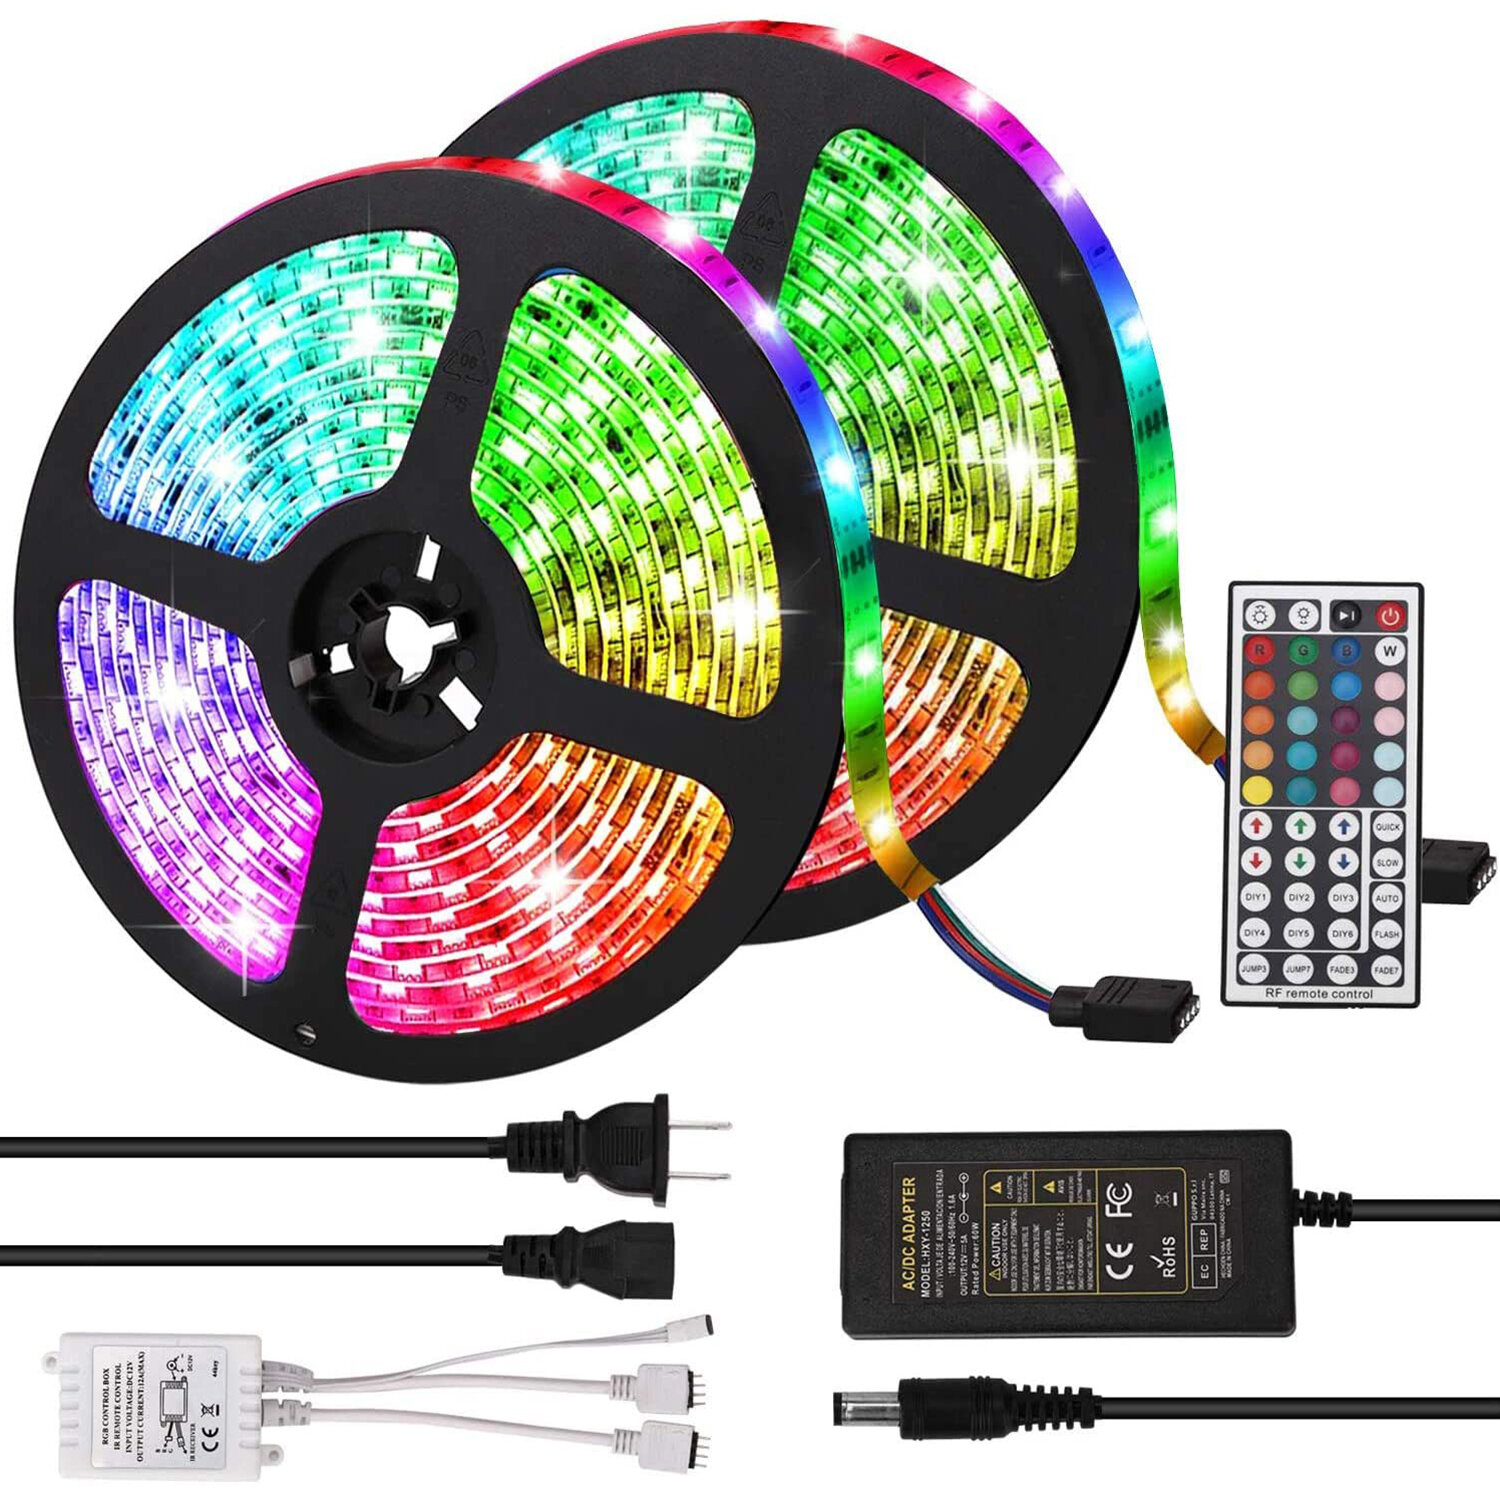 UL Listed LED Strip Lights 16.4ft RGB Color Changing with Remote & UL-Adapter for Room Cupboard Decoration Bright 2835 LEDs Tape Light Cutting Design Easy Installation Bedroom TV Ceiling 